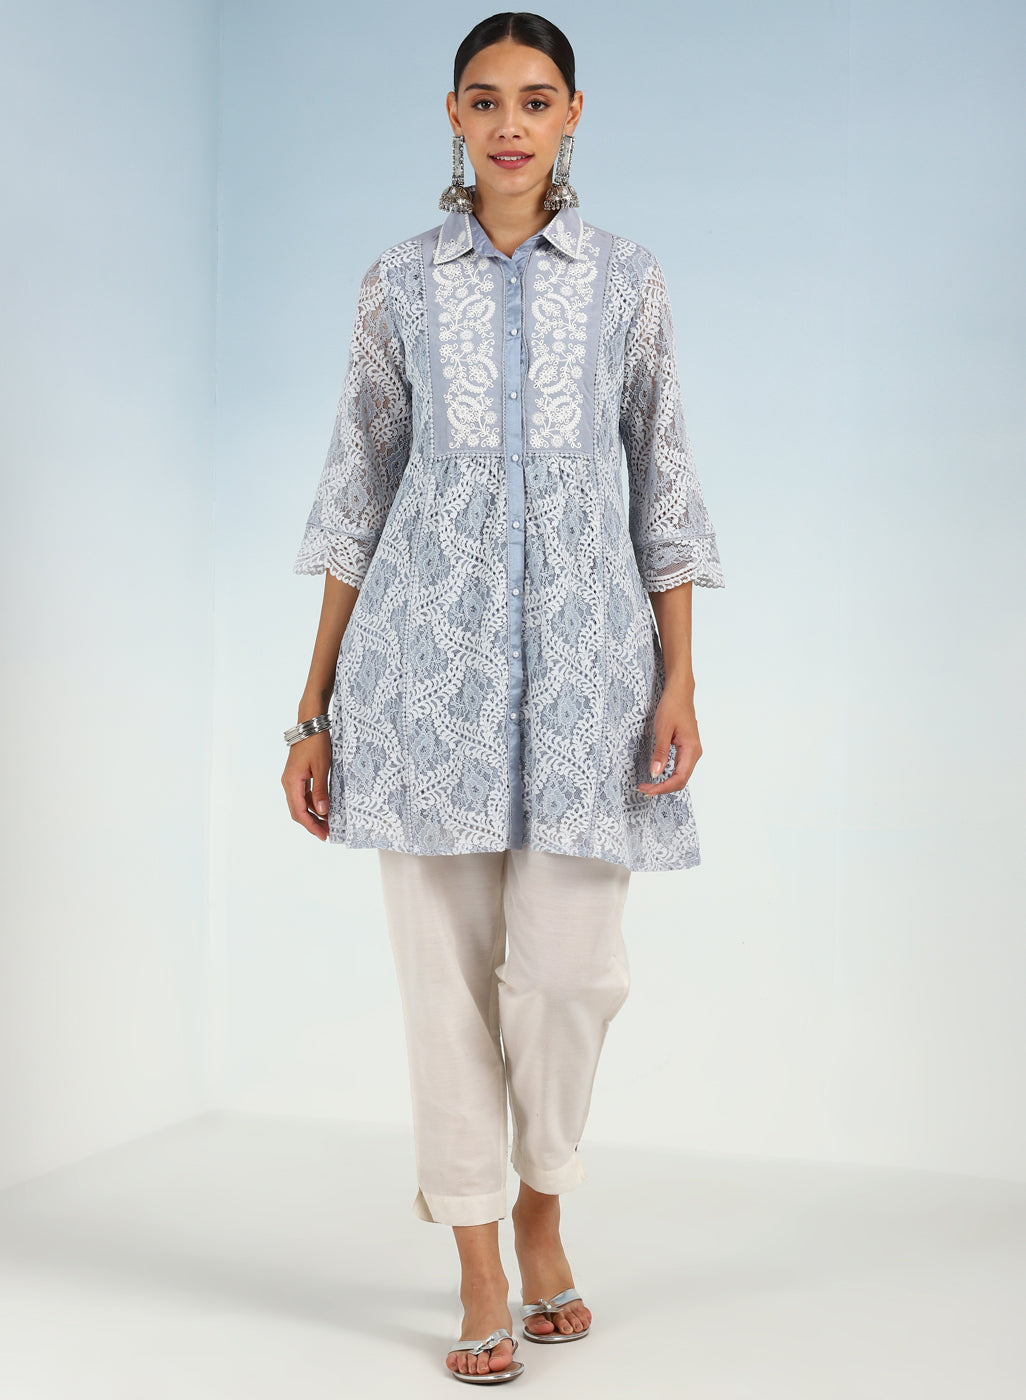 Spa Blue Lace Collared Tunic for Women